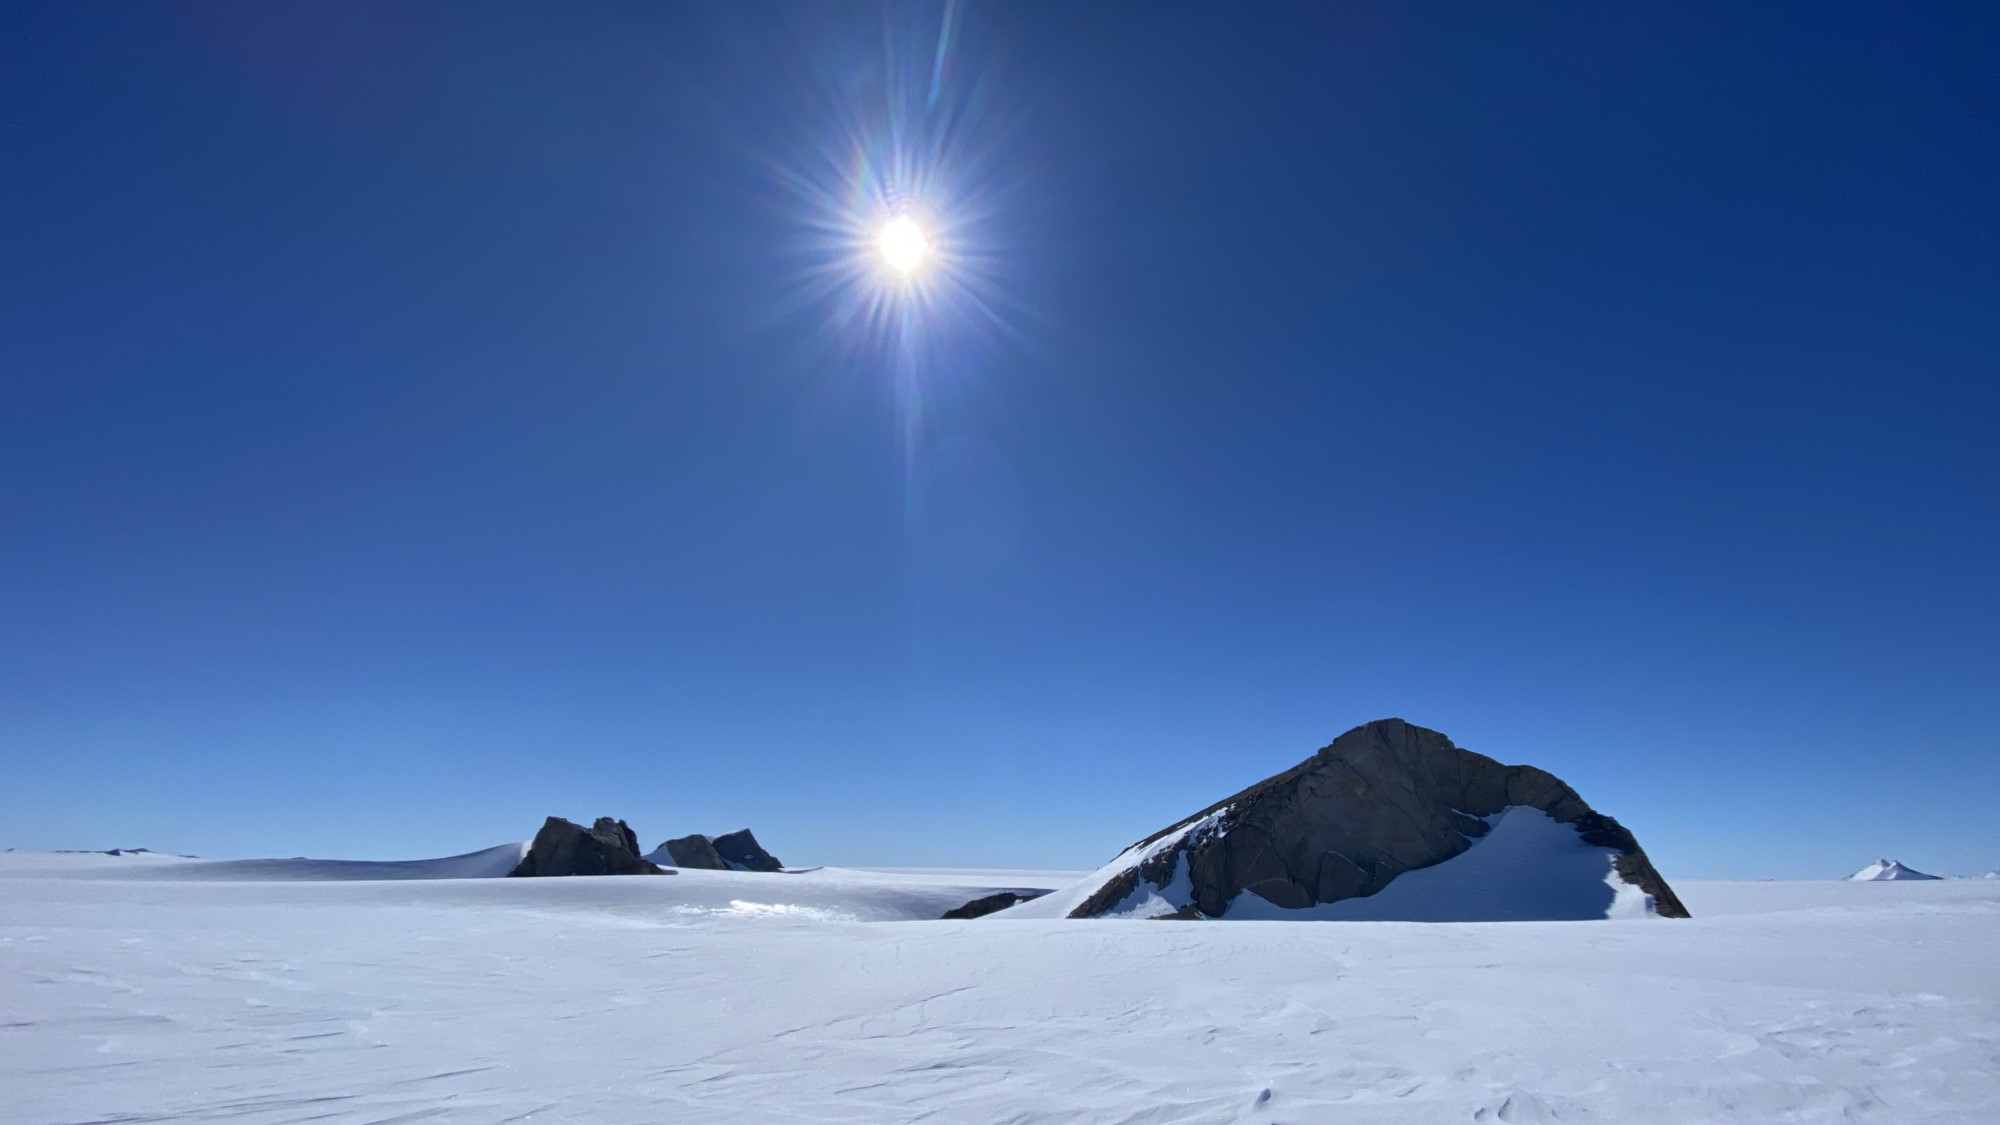 The icy landscape of Antarctica where five meteorites were recovered, including a rare 17-pound monster.